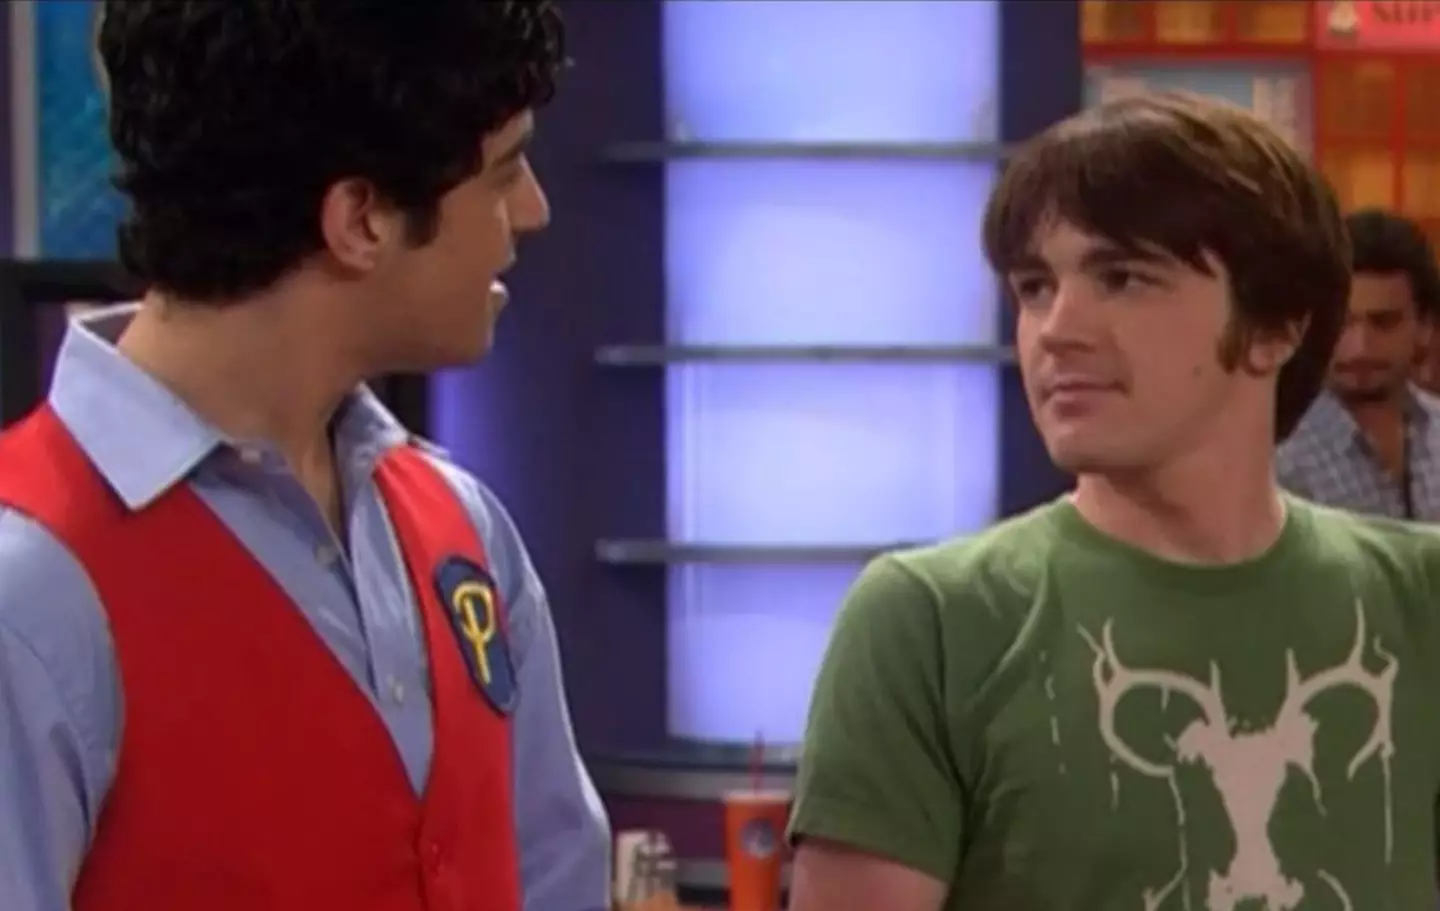 Drake and Josh played step-brothers in the Nickelodeon show.